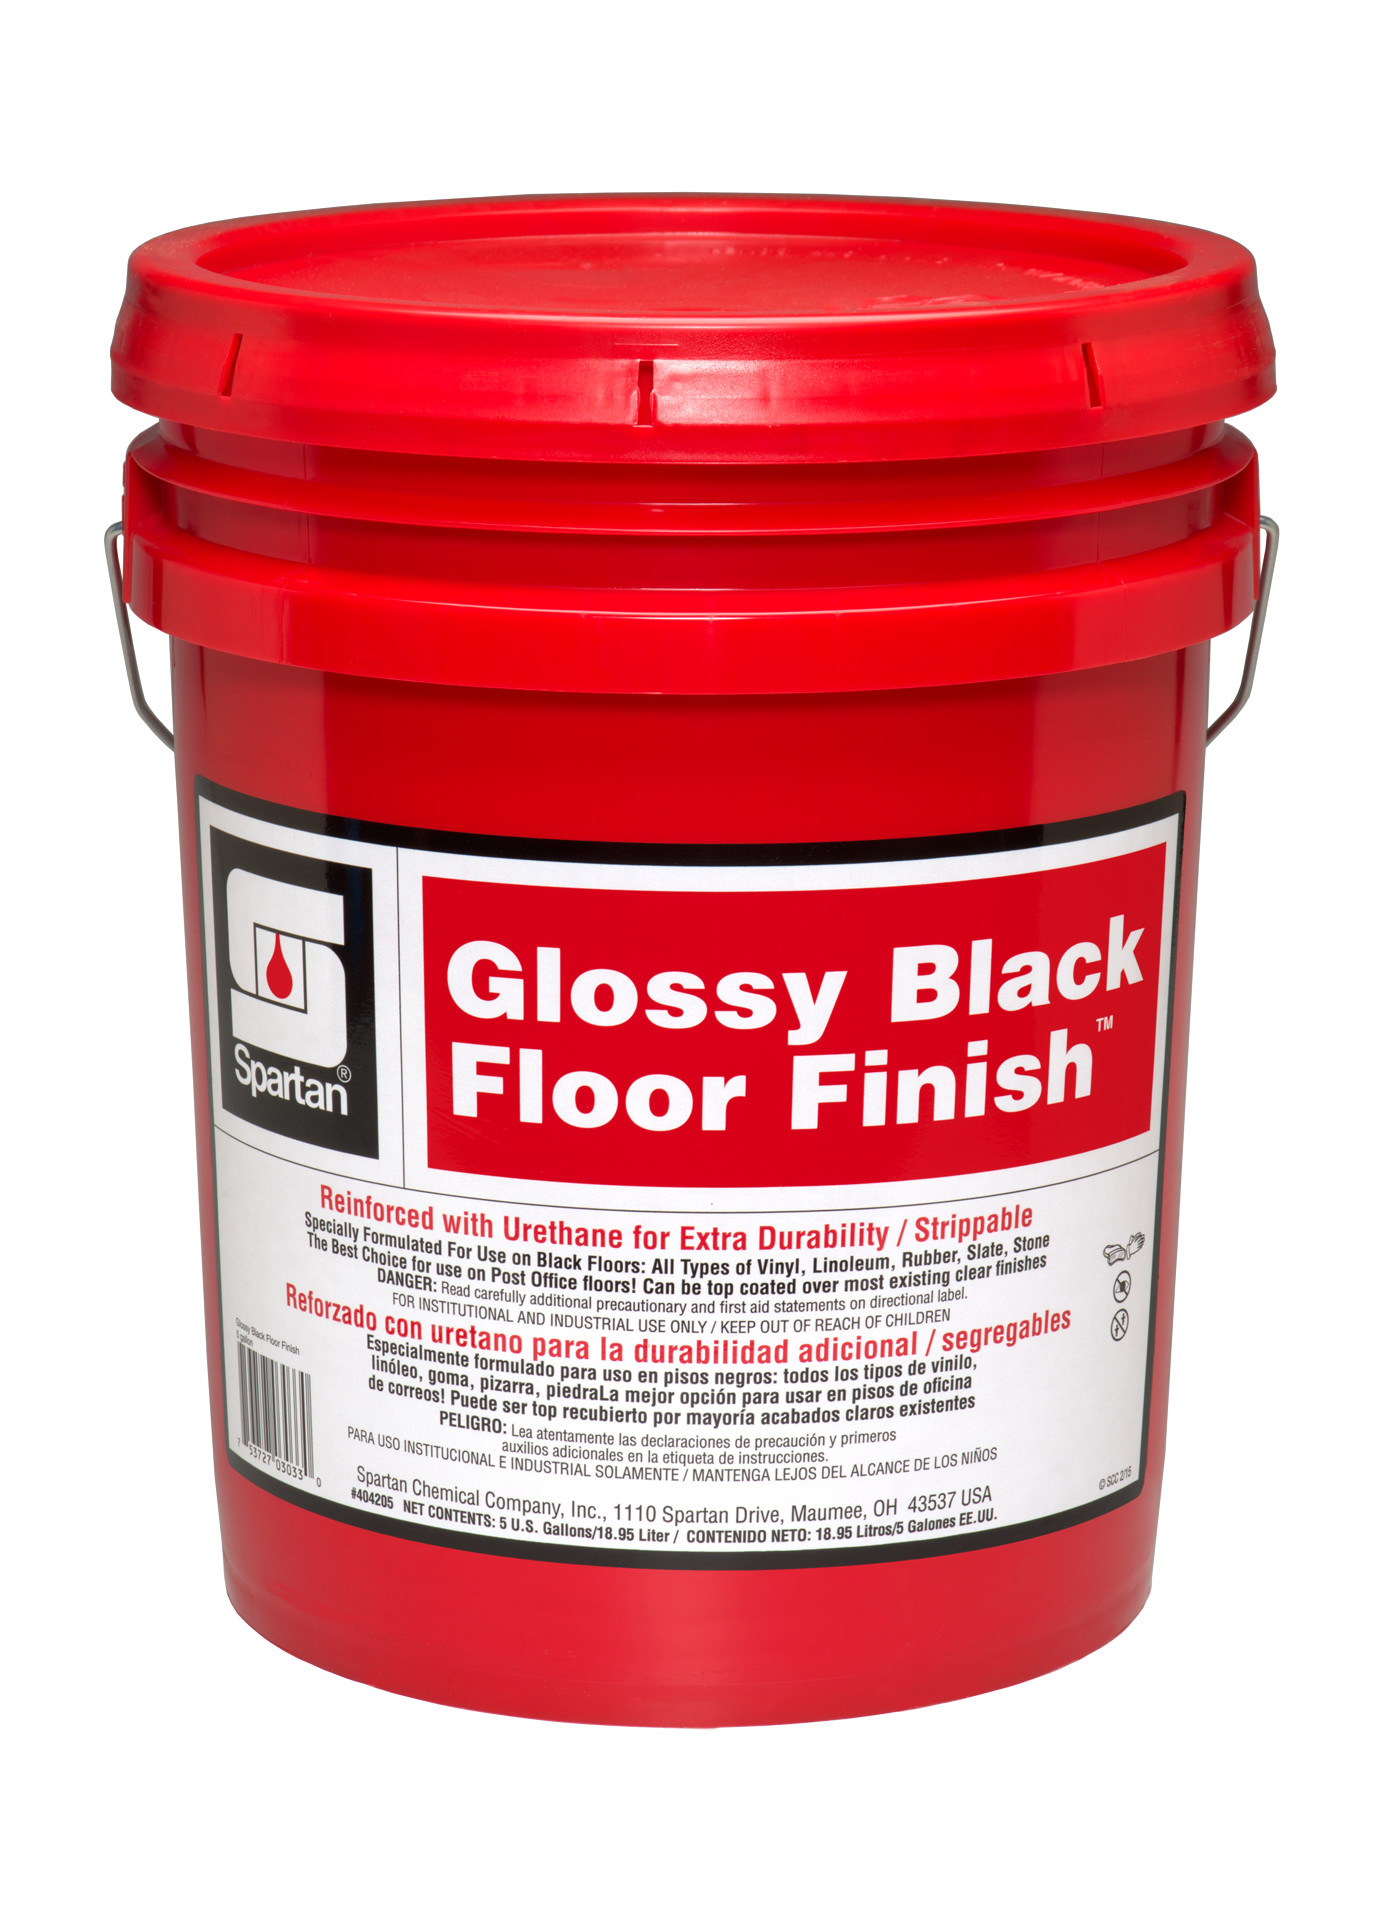 Spartan Chemical Company Glossy Black Floor Finish, 5 GAL PAIL